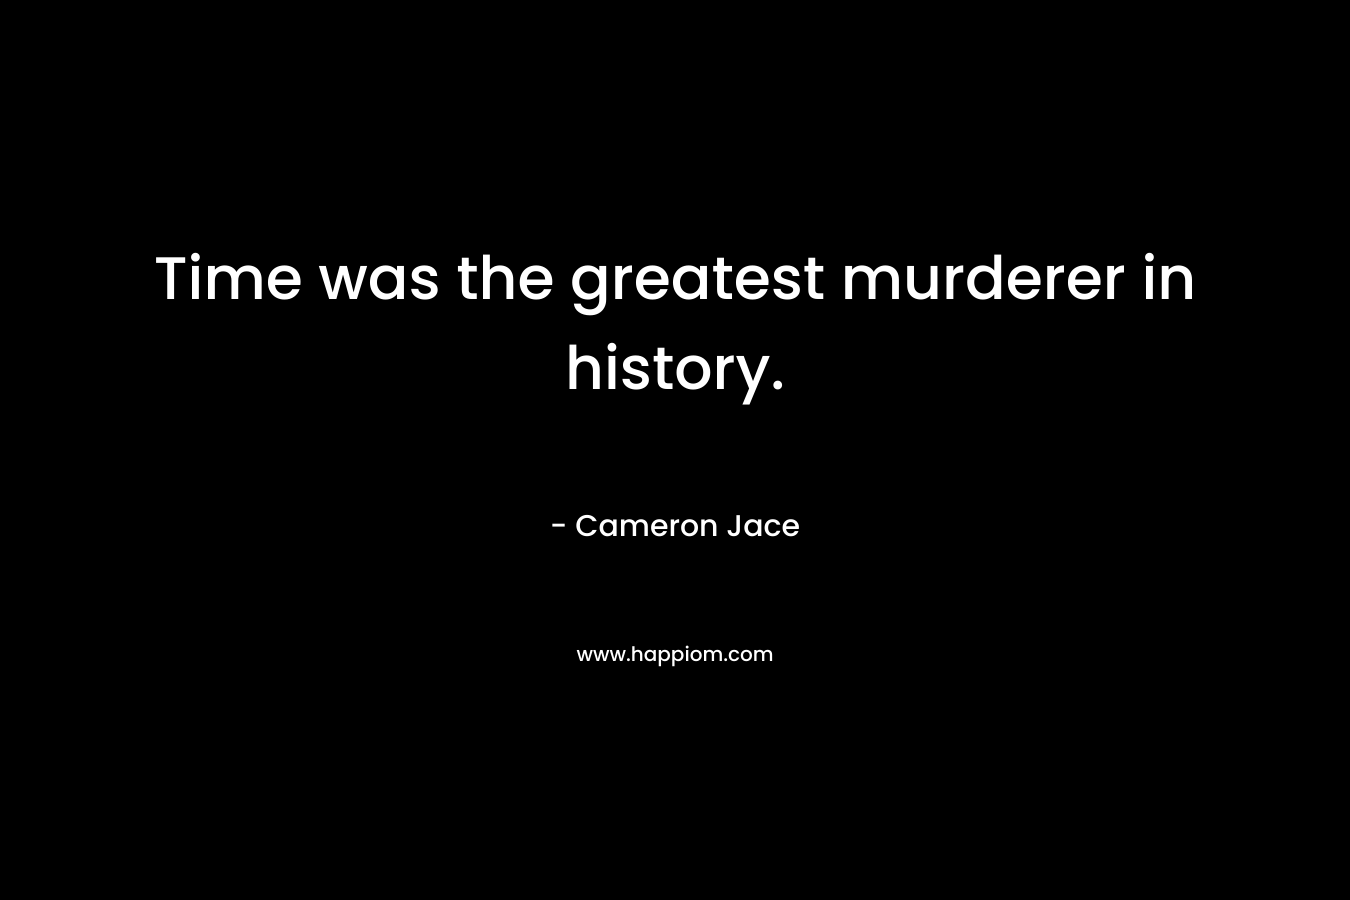 Time was the greatest murderer in history. – Cameron Jace